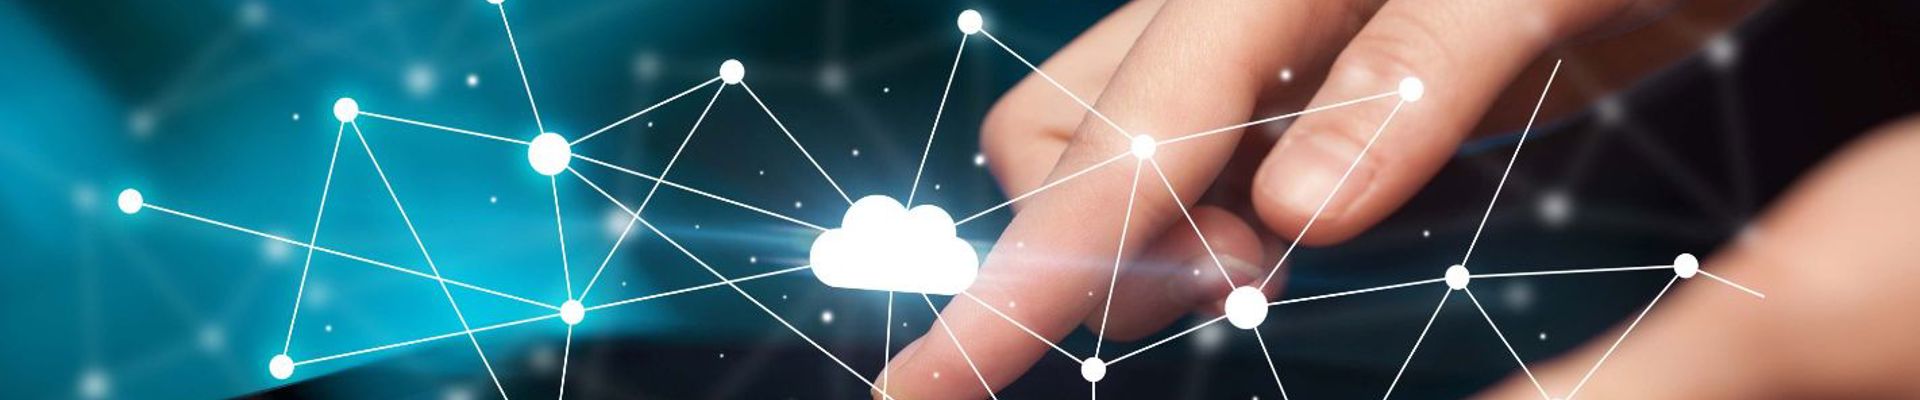 Cloud Software Trends: What can we expect to see in 2021? 